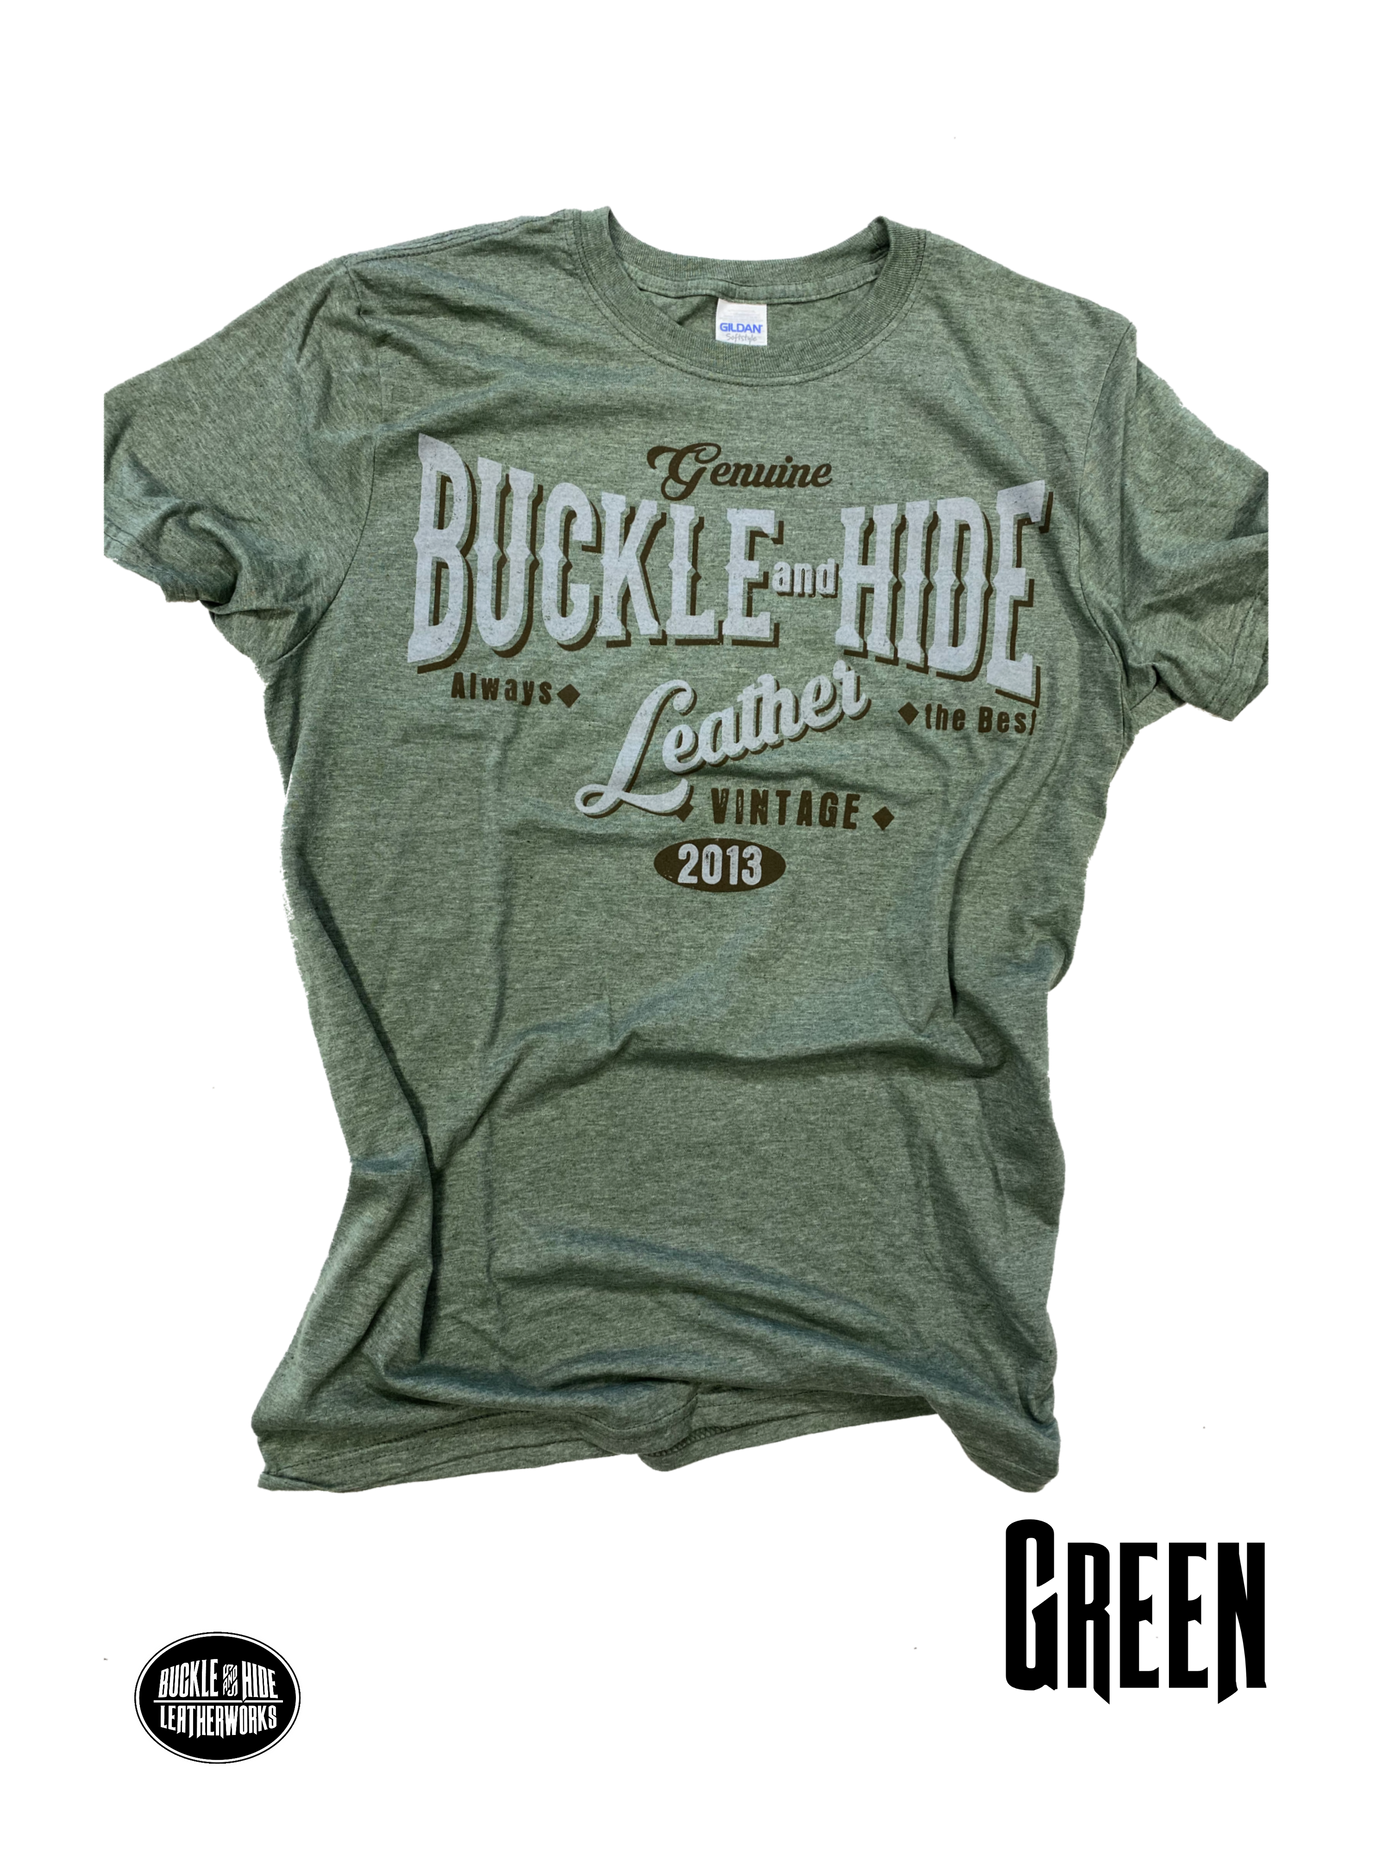 Buckle and Hide "Genuine" T-Shirt